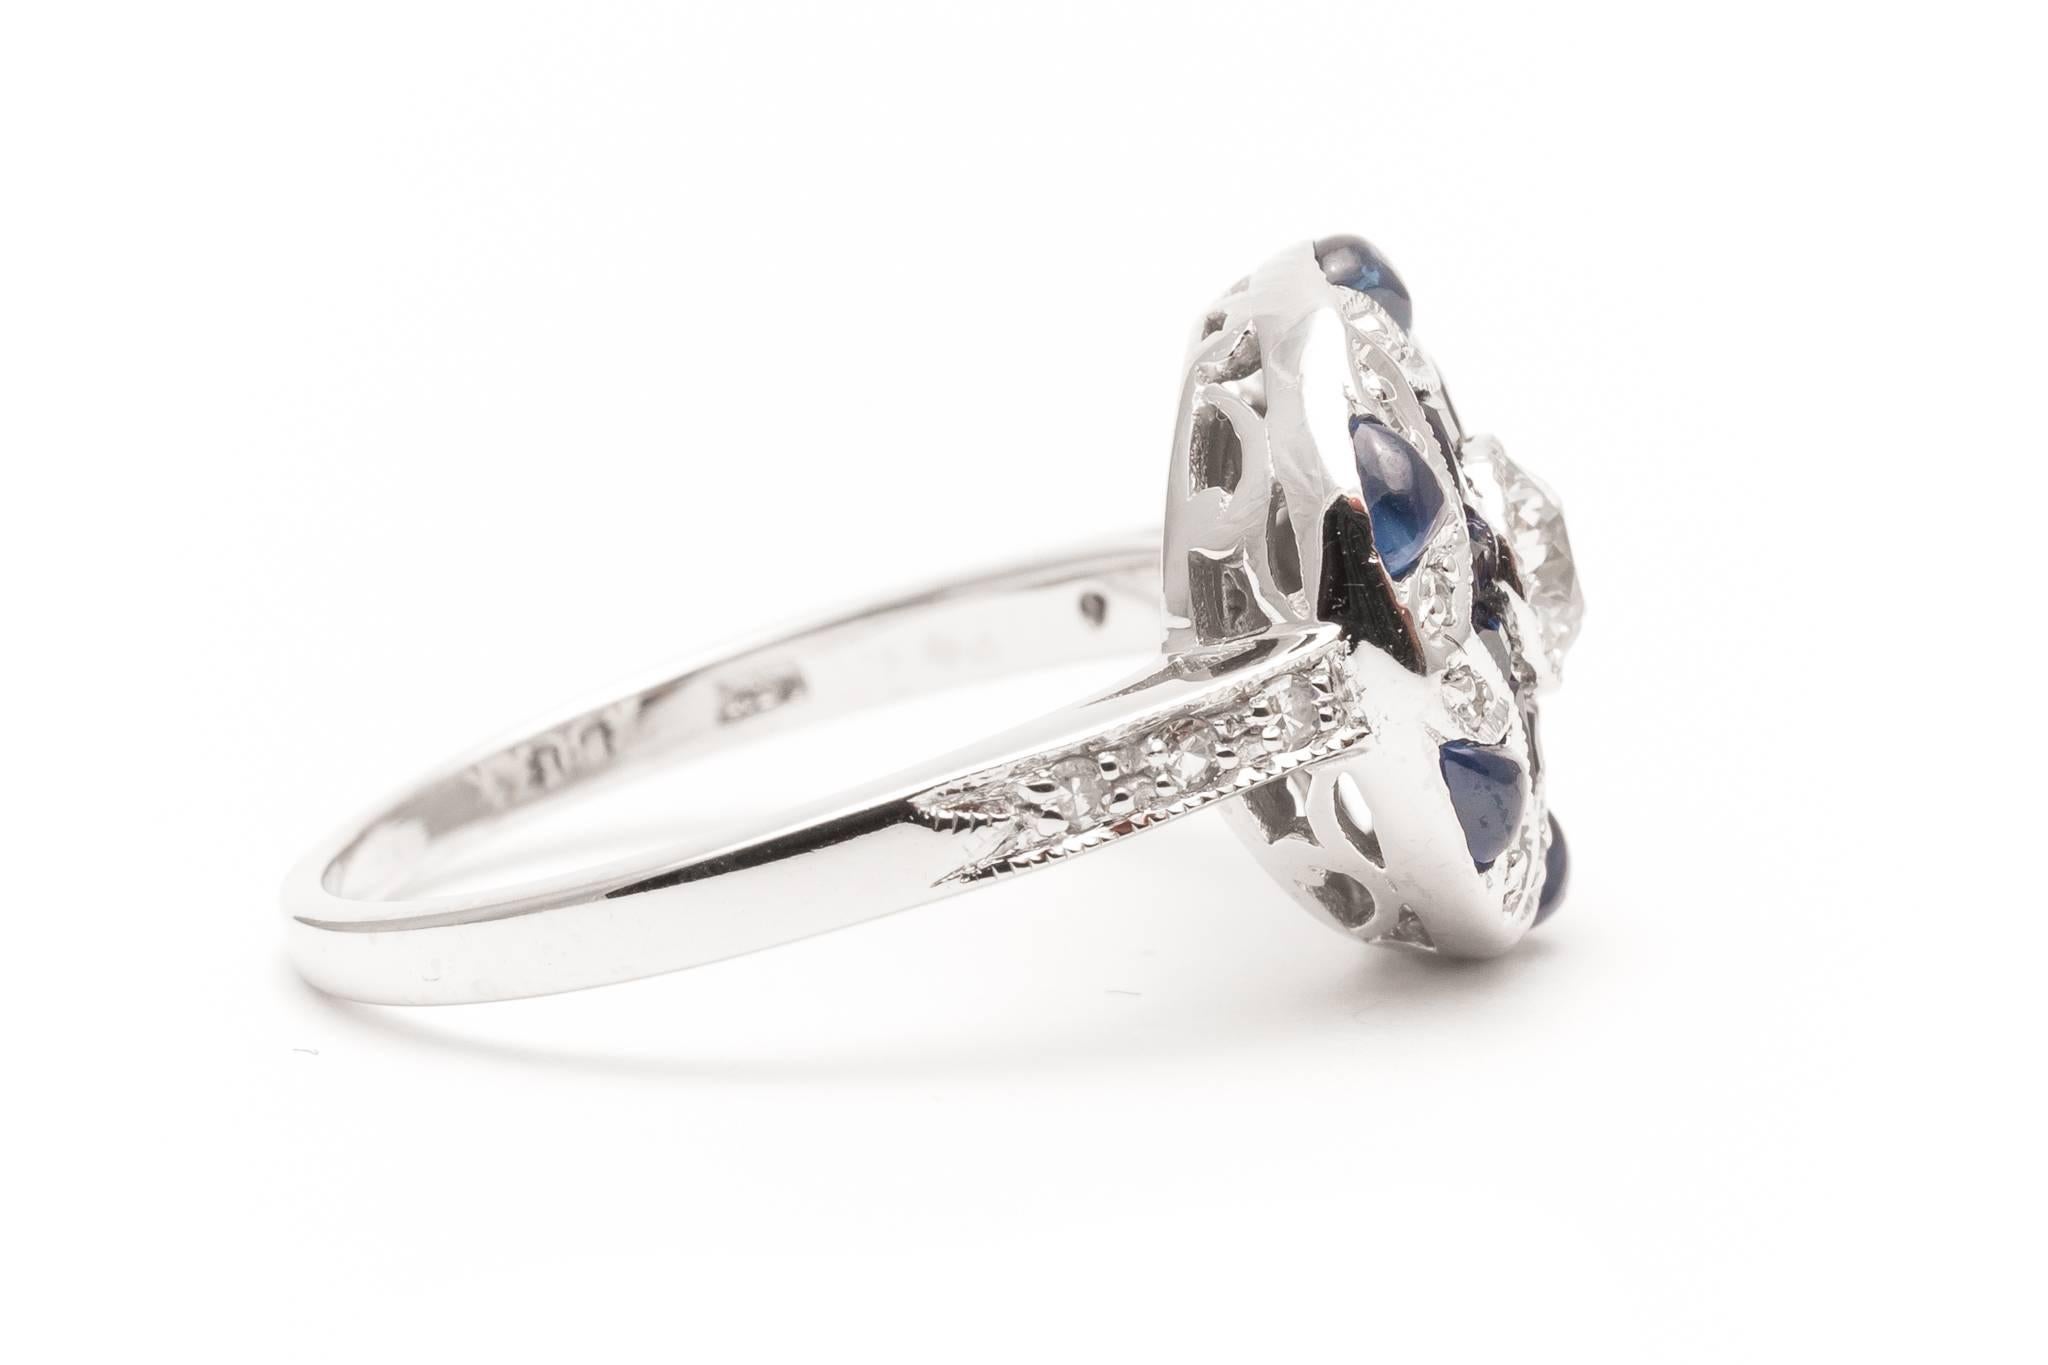 Women's Exquisite Diamond and French Cut Sapphire White Gold Ring